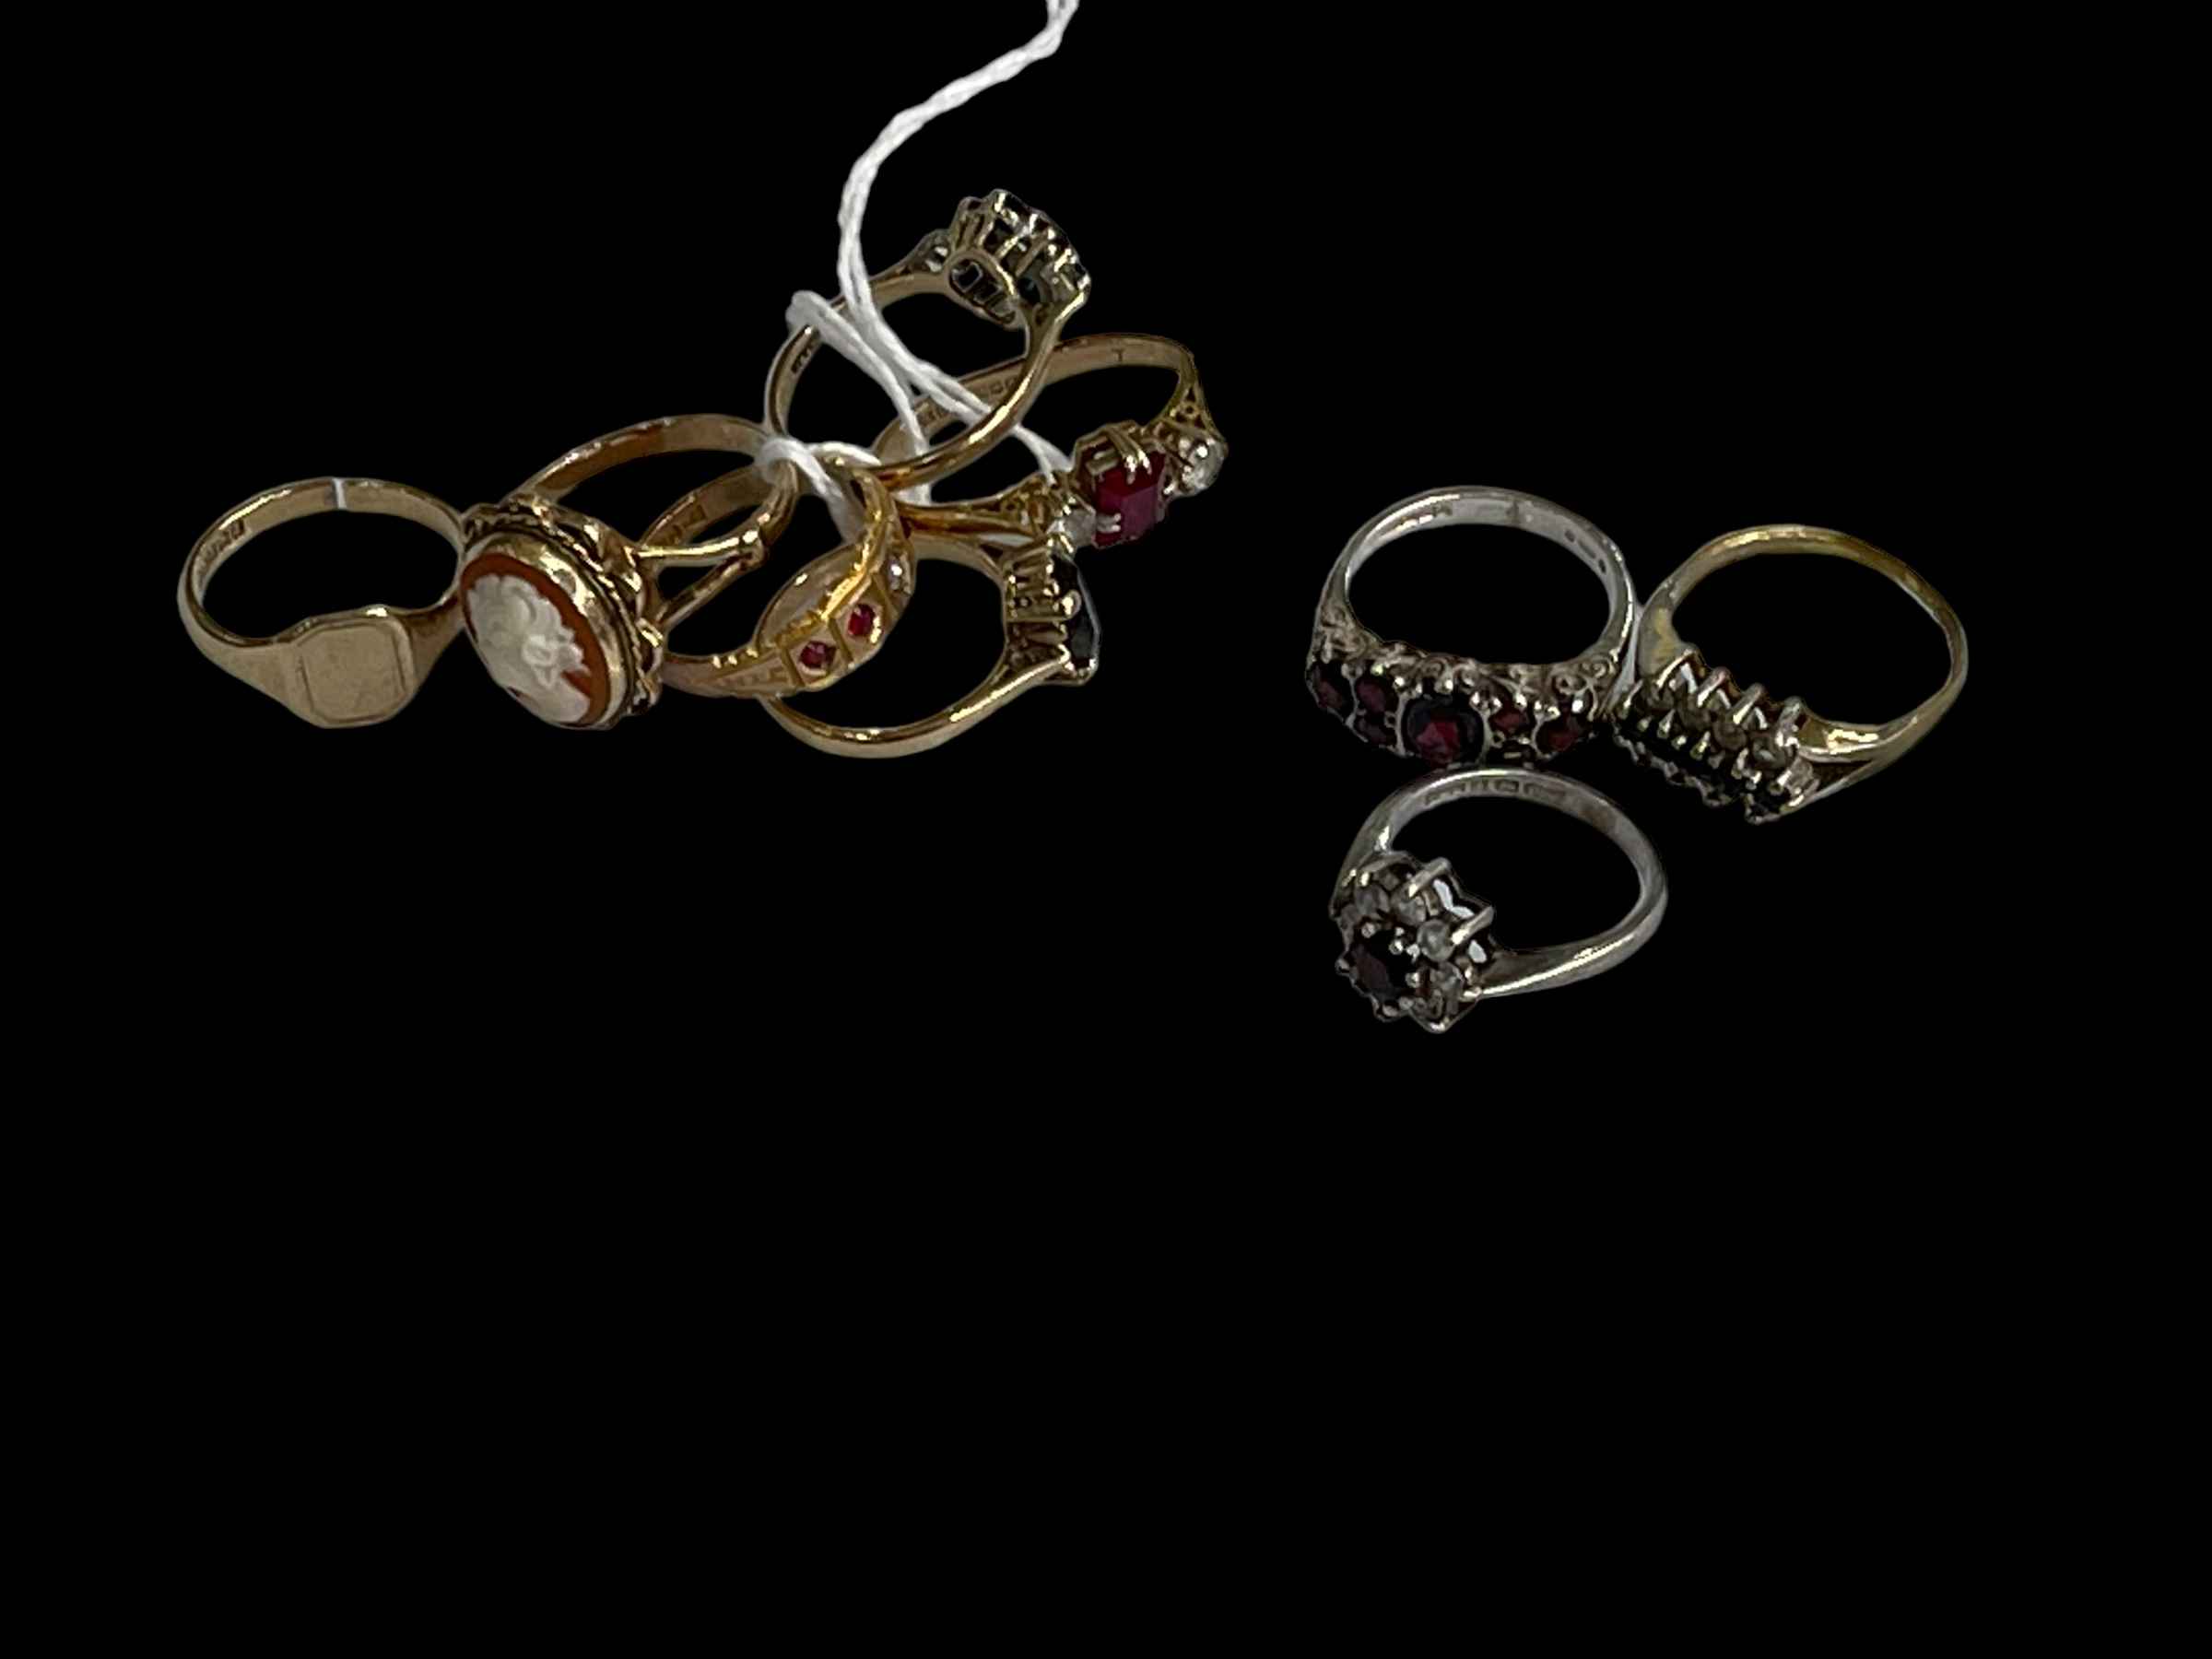 Six 9 carat gold rings and three others.